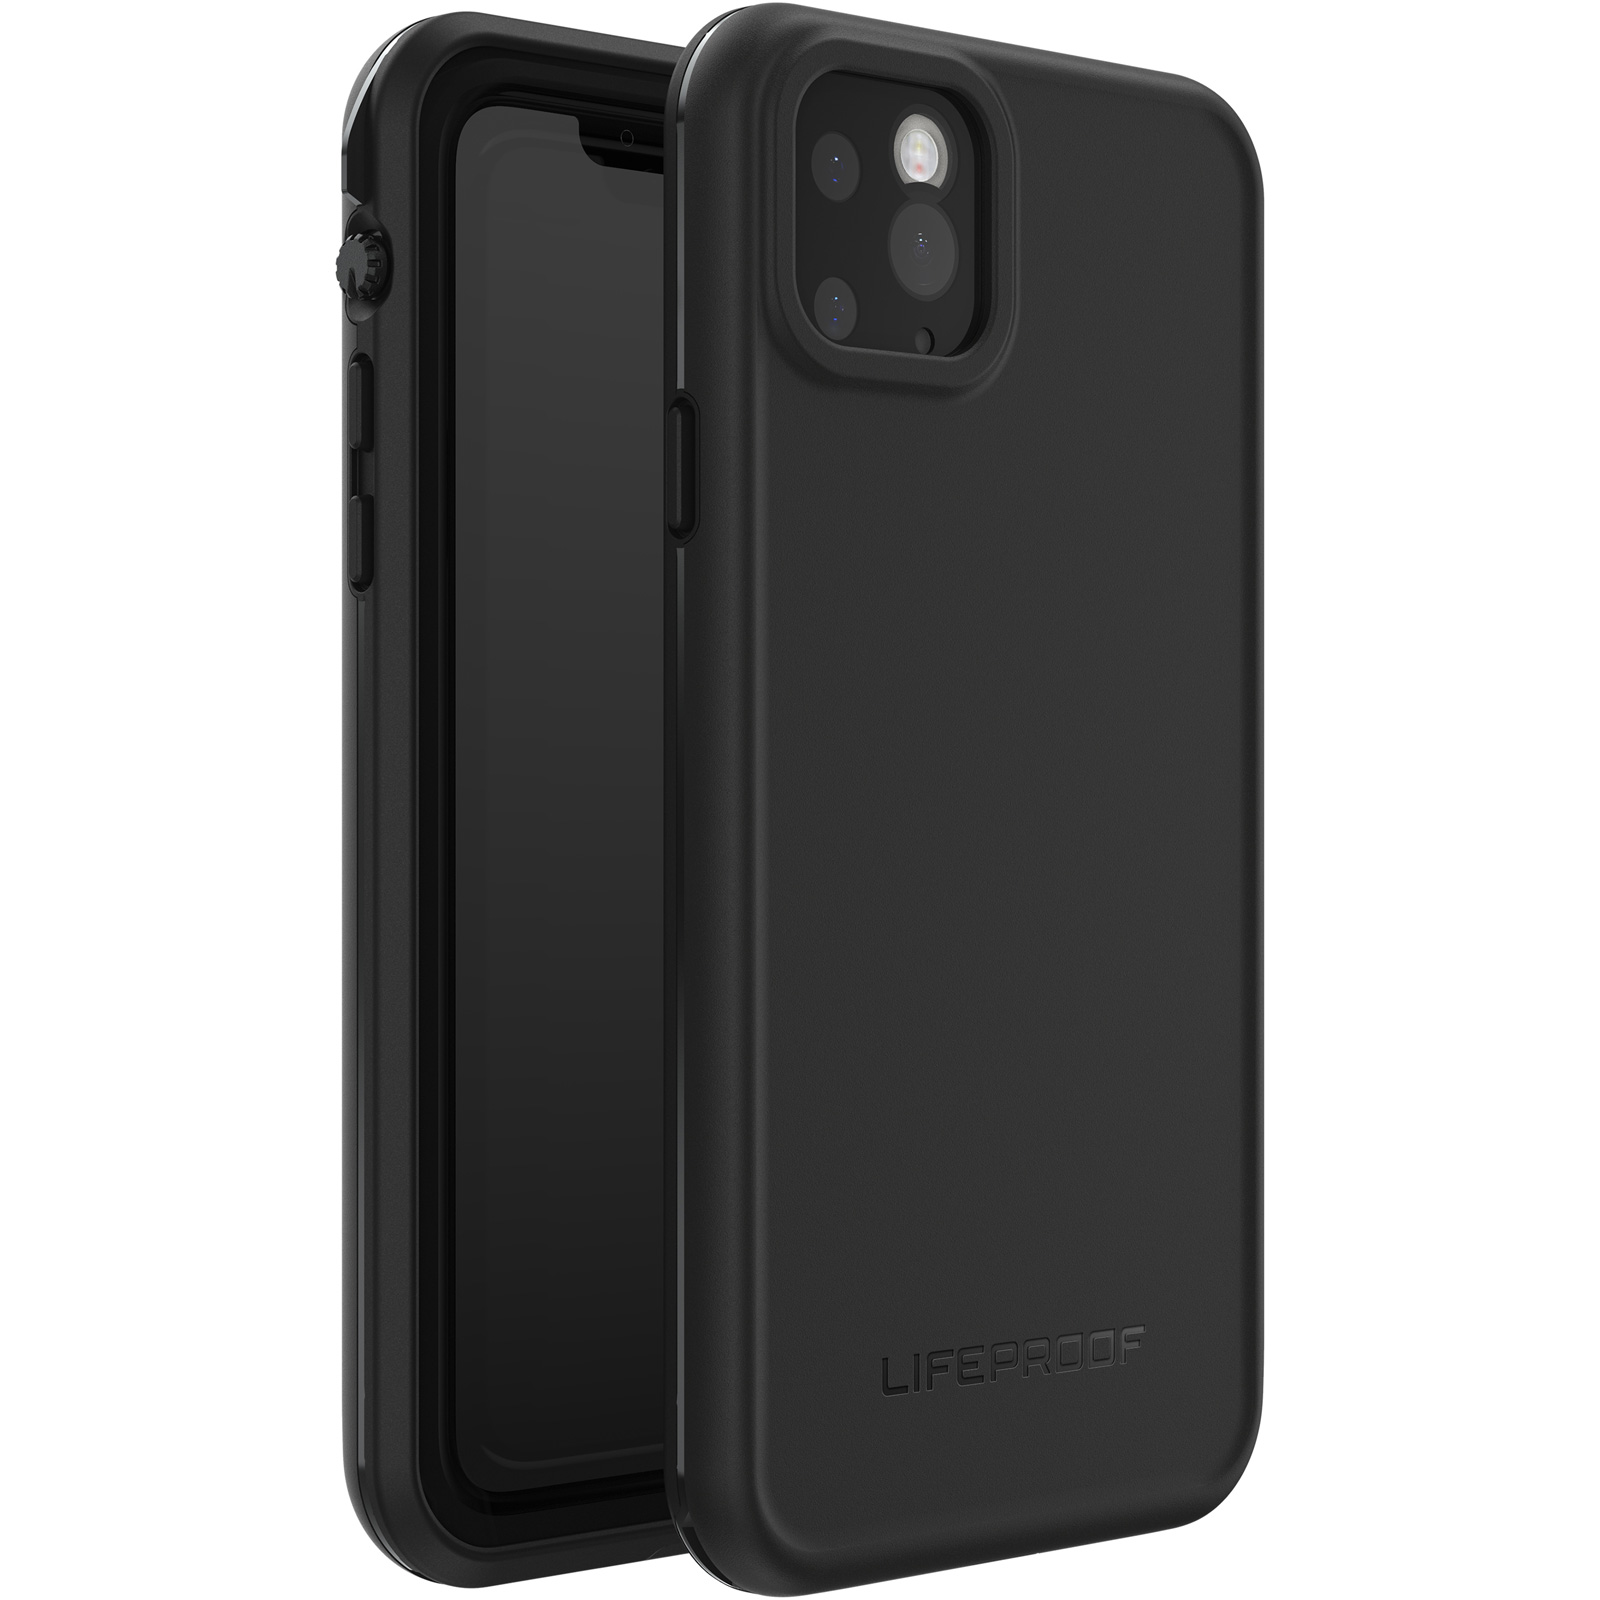 FRĒ Case for iPhone 11 Pro Max